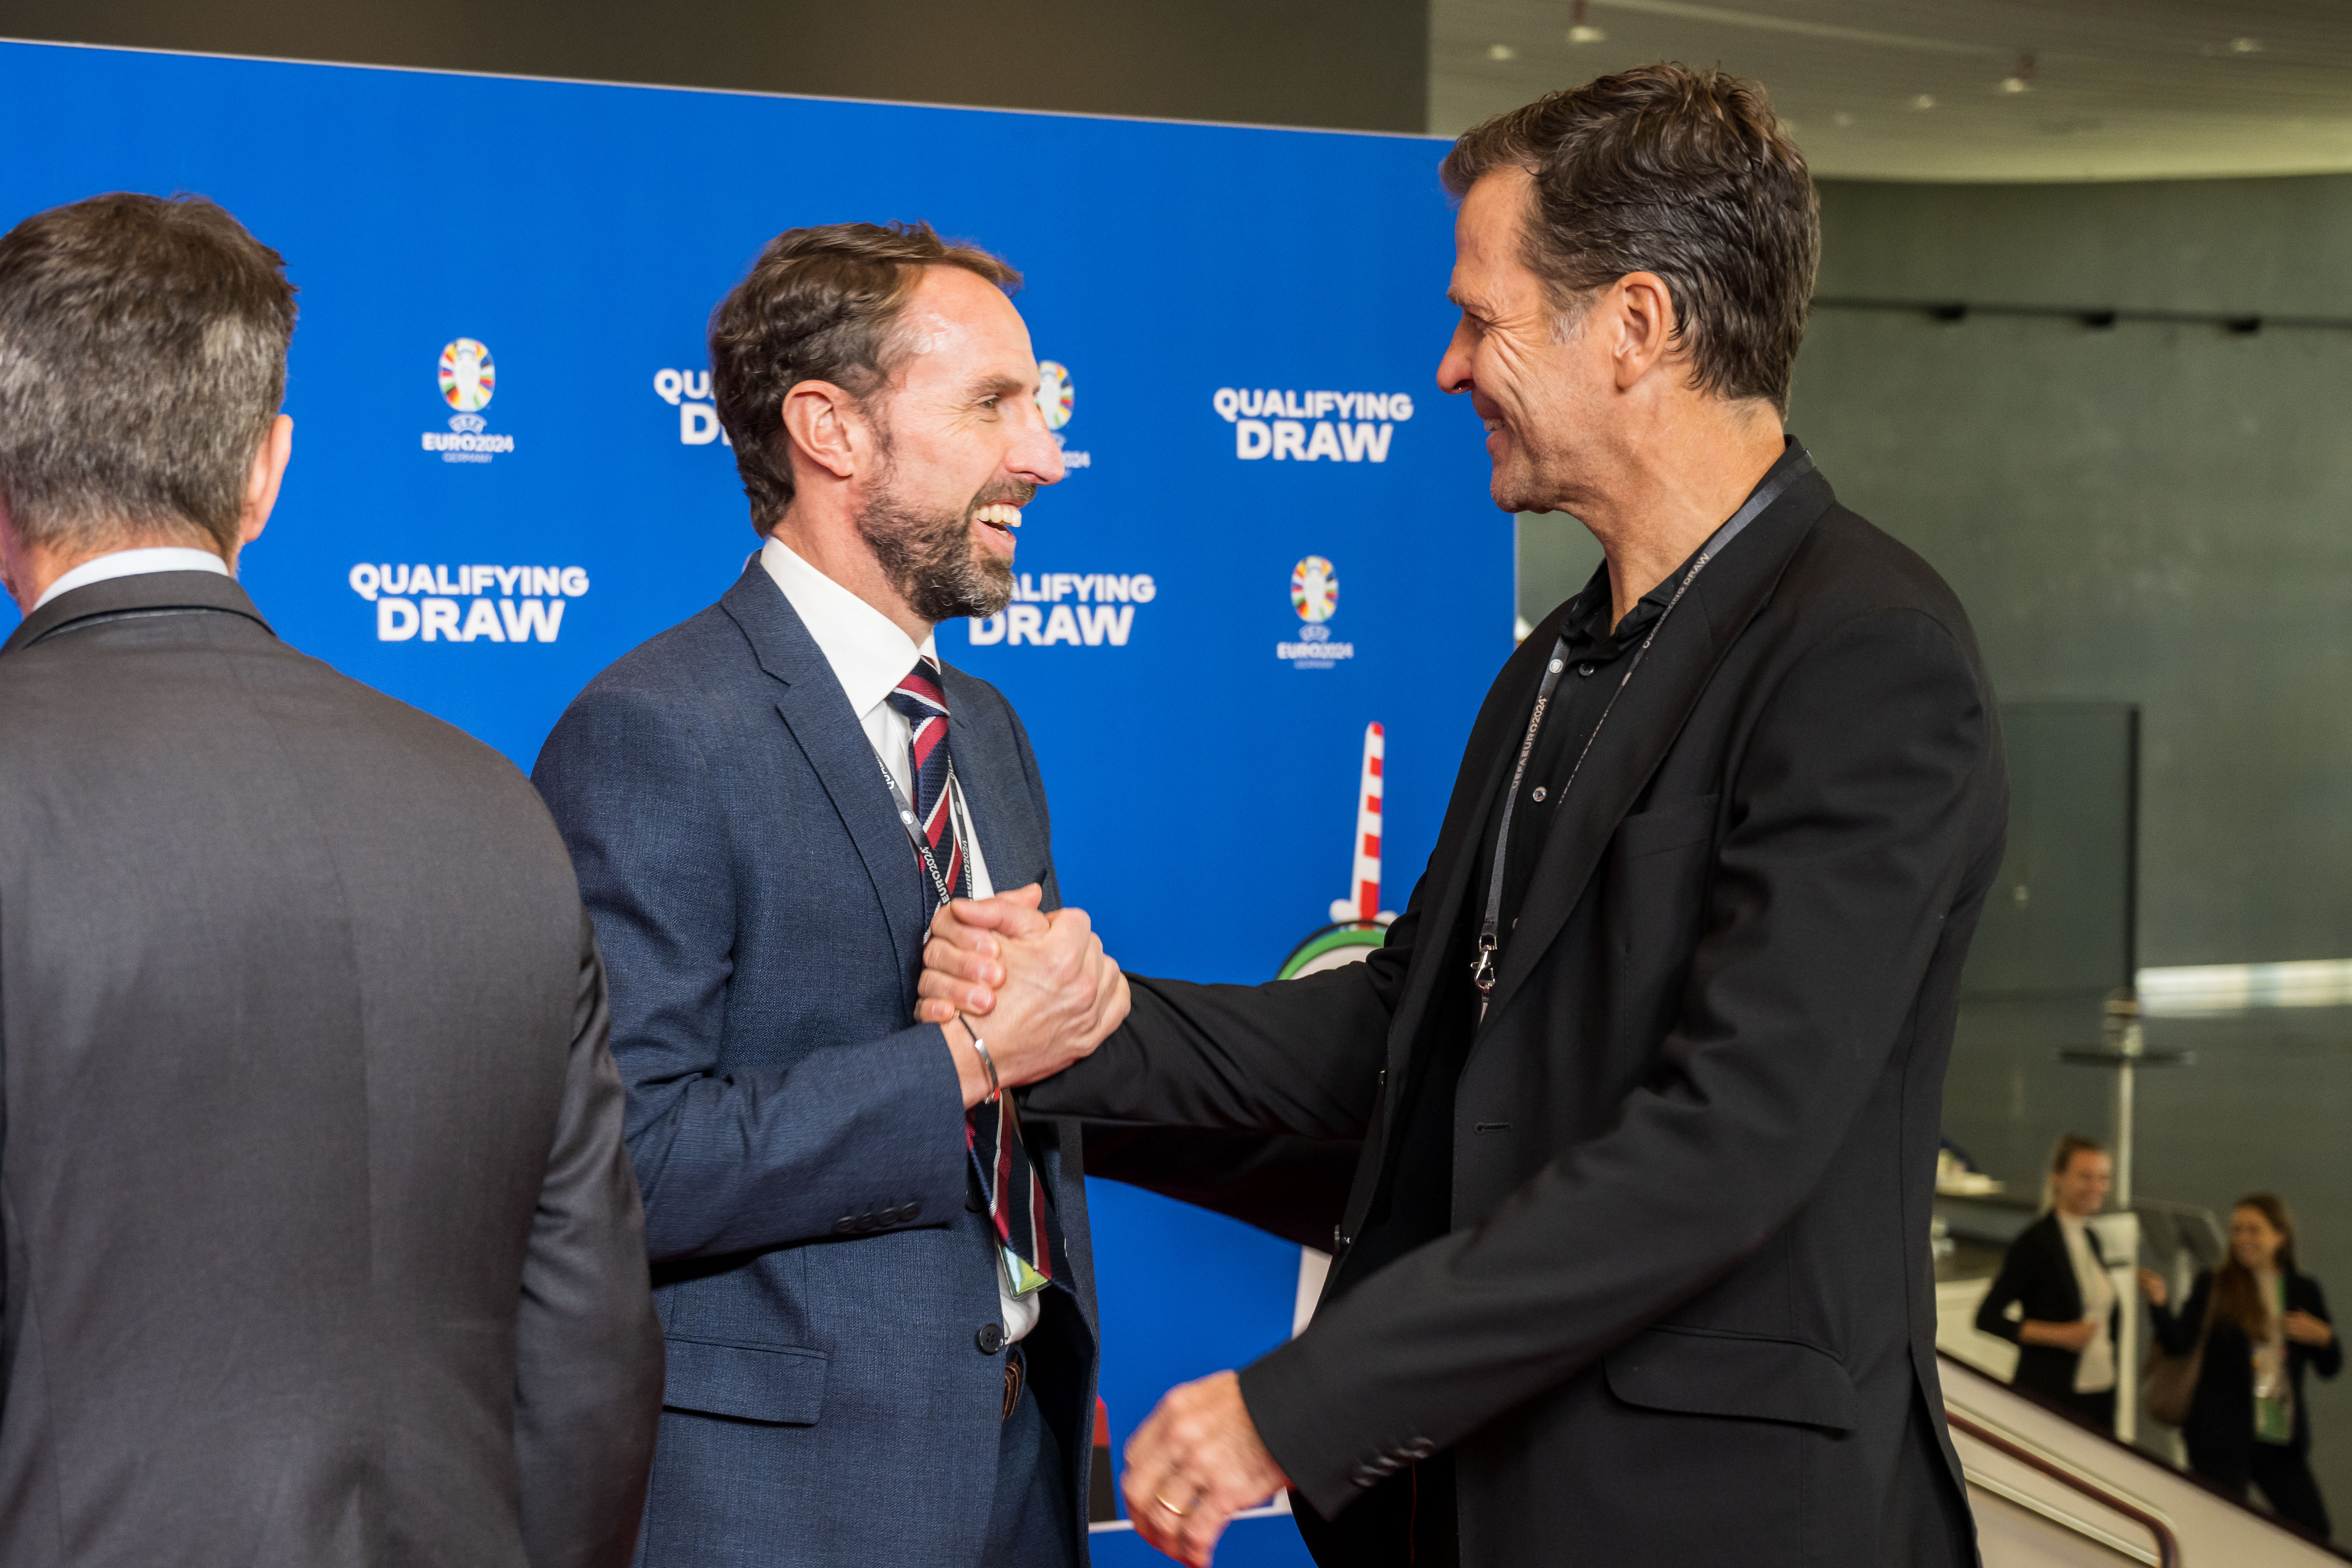 Gareth Southgate, Head Coach of England and Oliver Bierhoff, technical director of the German national football team